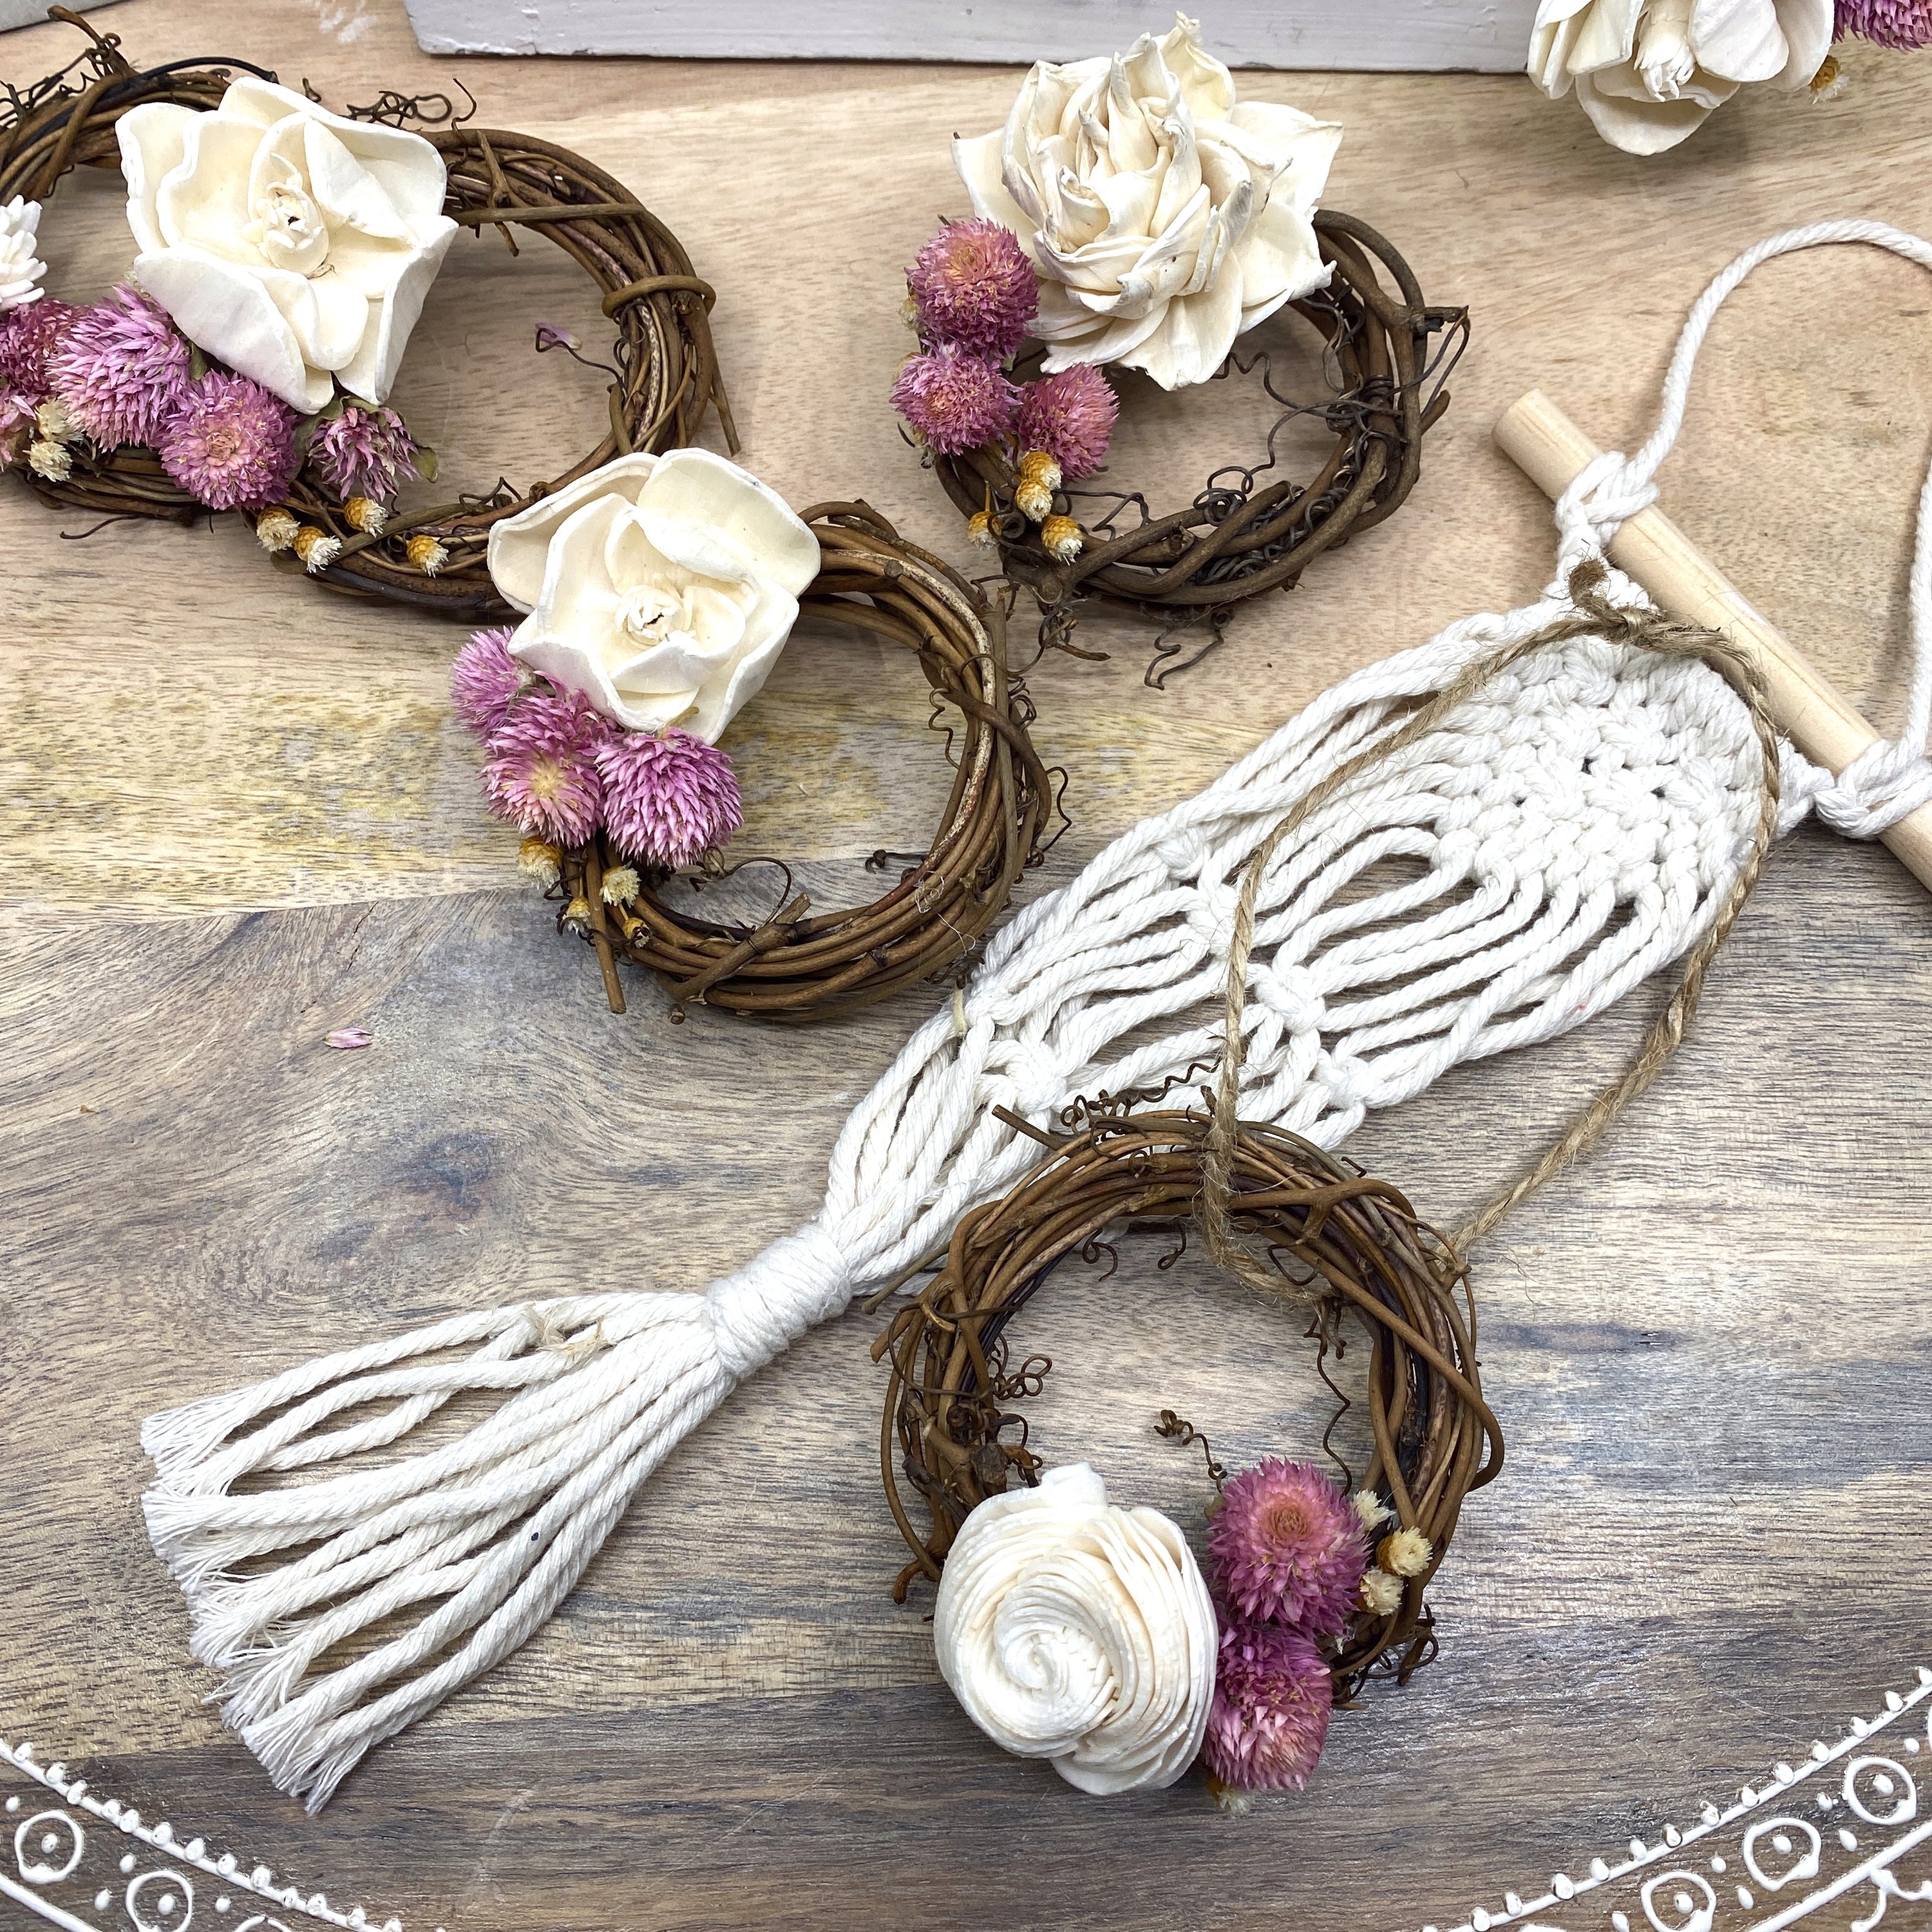 Mini Grapevine Wreath Ornaments with Dried Flowers, 3”